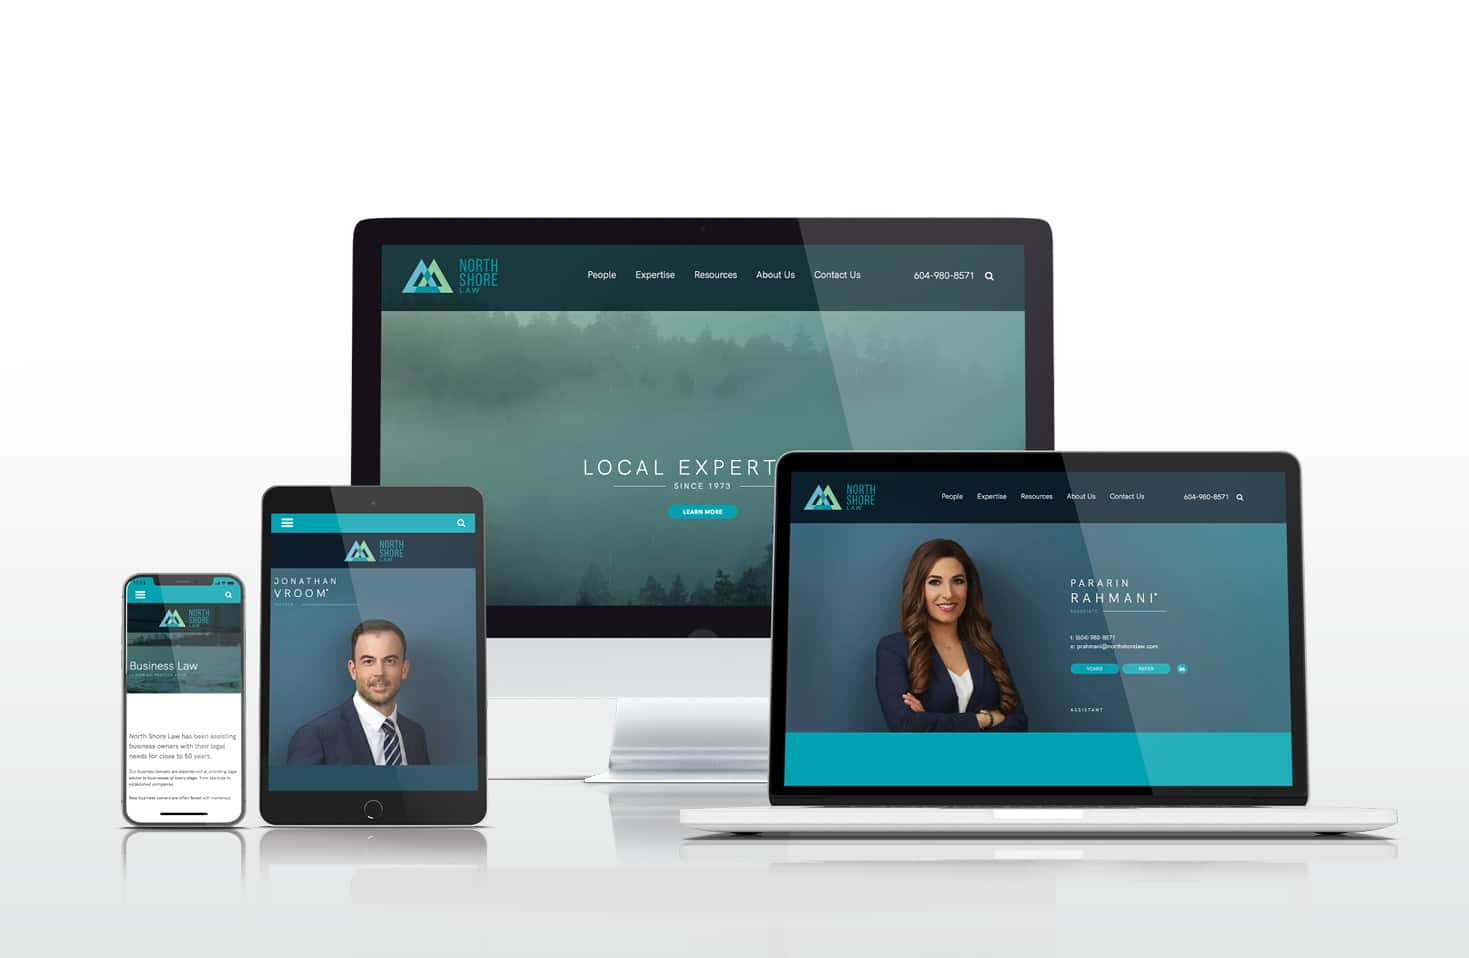 north shore law - law firm website